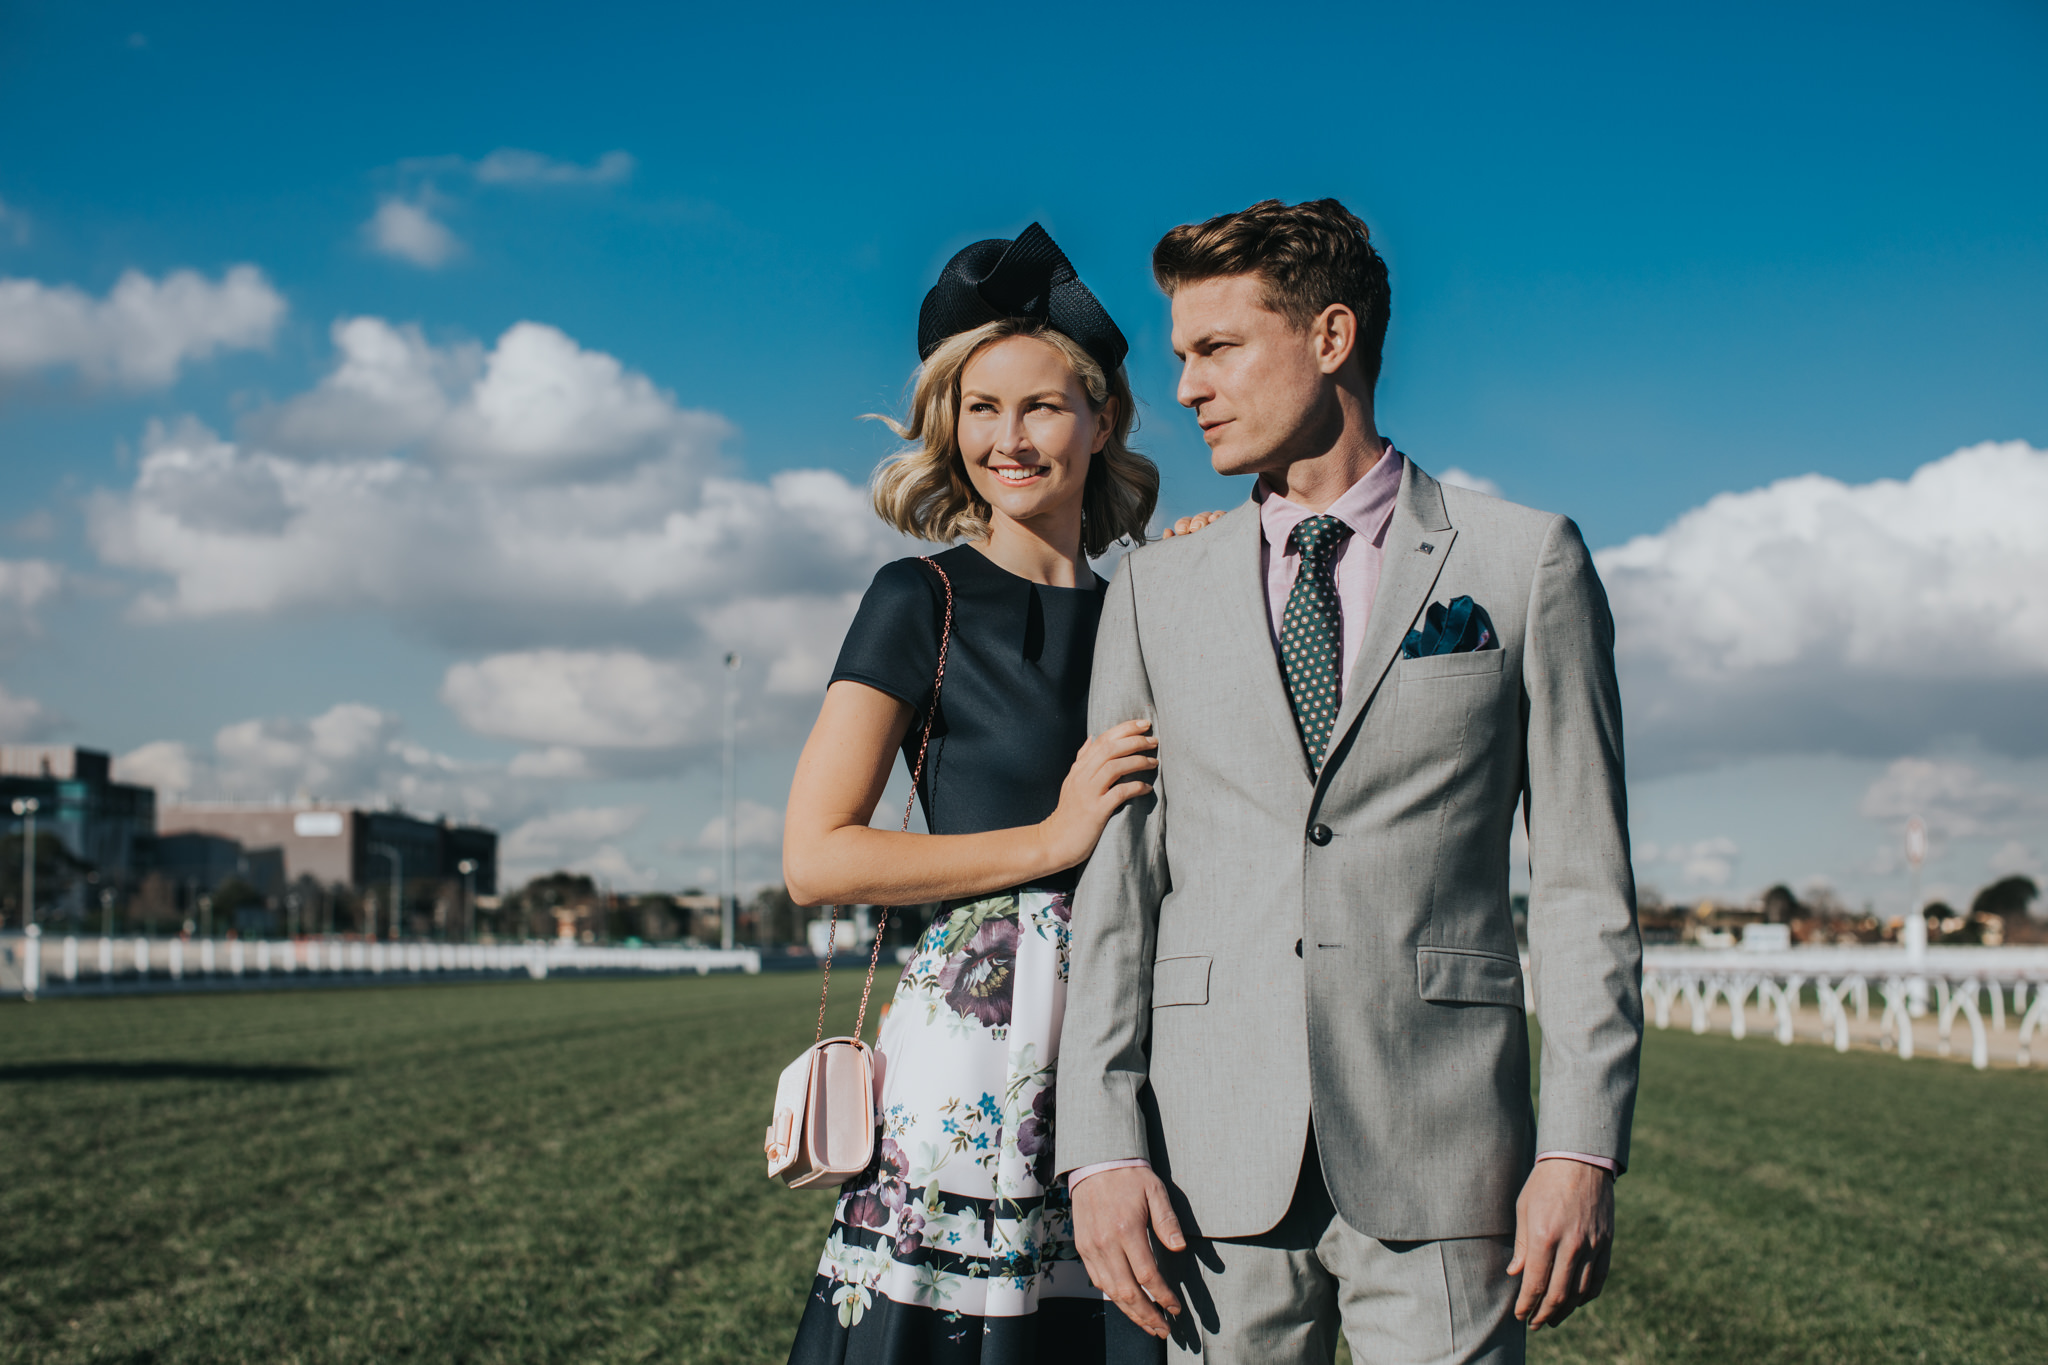 Editorial Fashion Photographer in Melbourne - Spring Racing Fashion 2017/2018